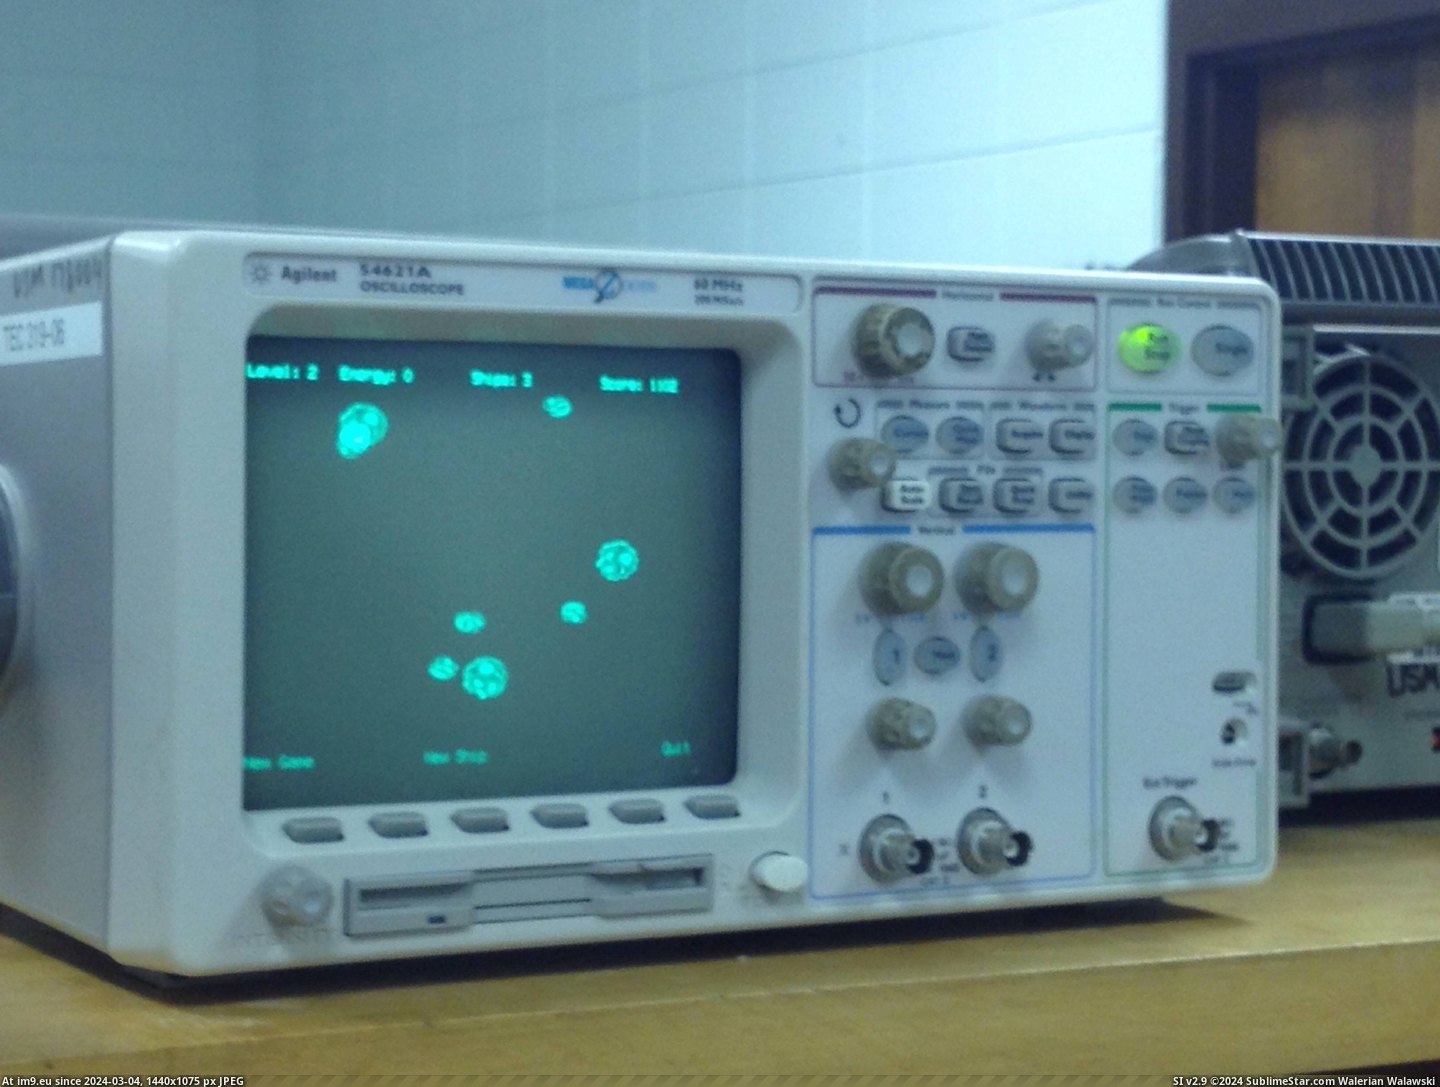 #Gaming #Lab #Oscilloscope #Electronics #Asteroids [Gaming] The Oscilloscope in our Electronics lab came with asteroids Pic. (Изображение из альбом My r/GAMING favs))